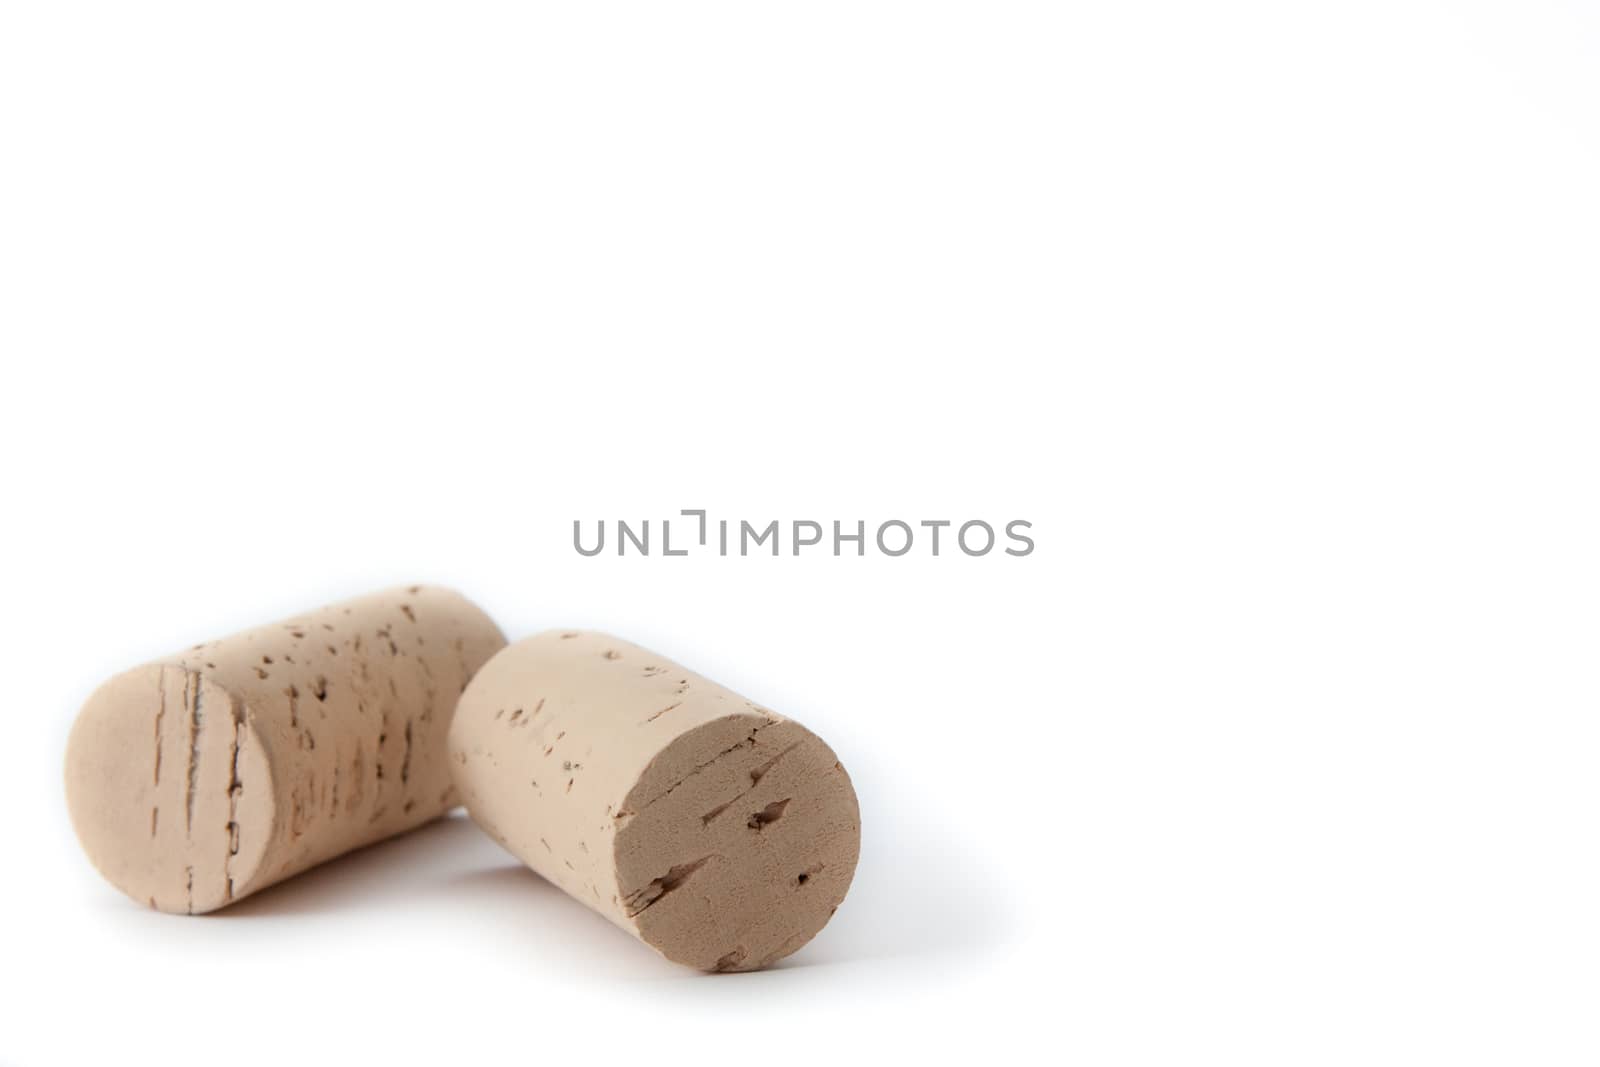 Wine corks isolated on a white background